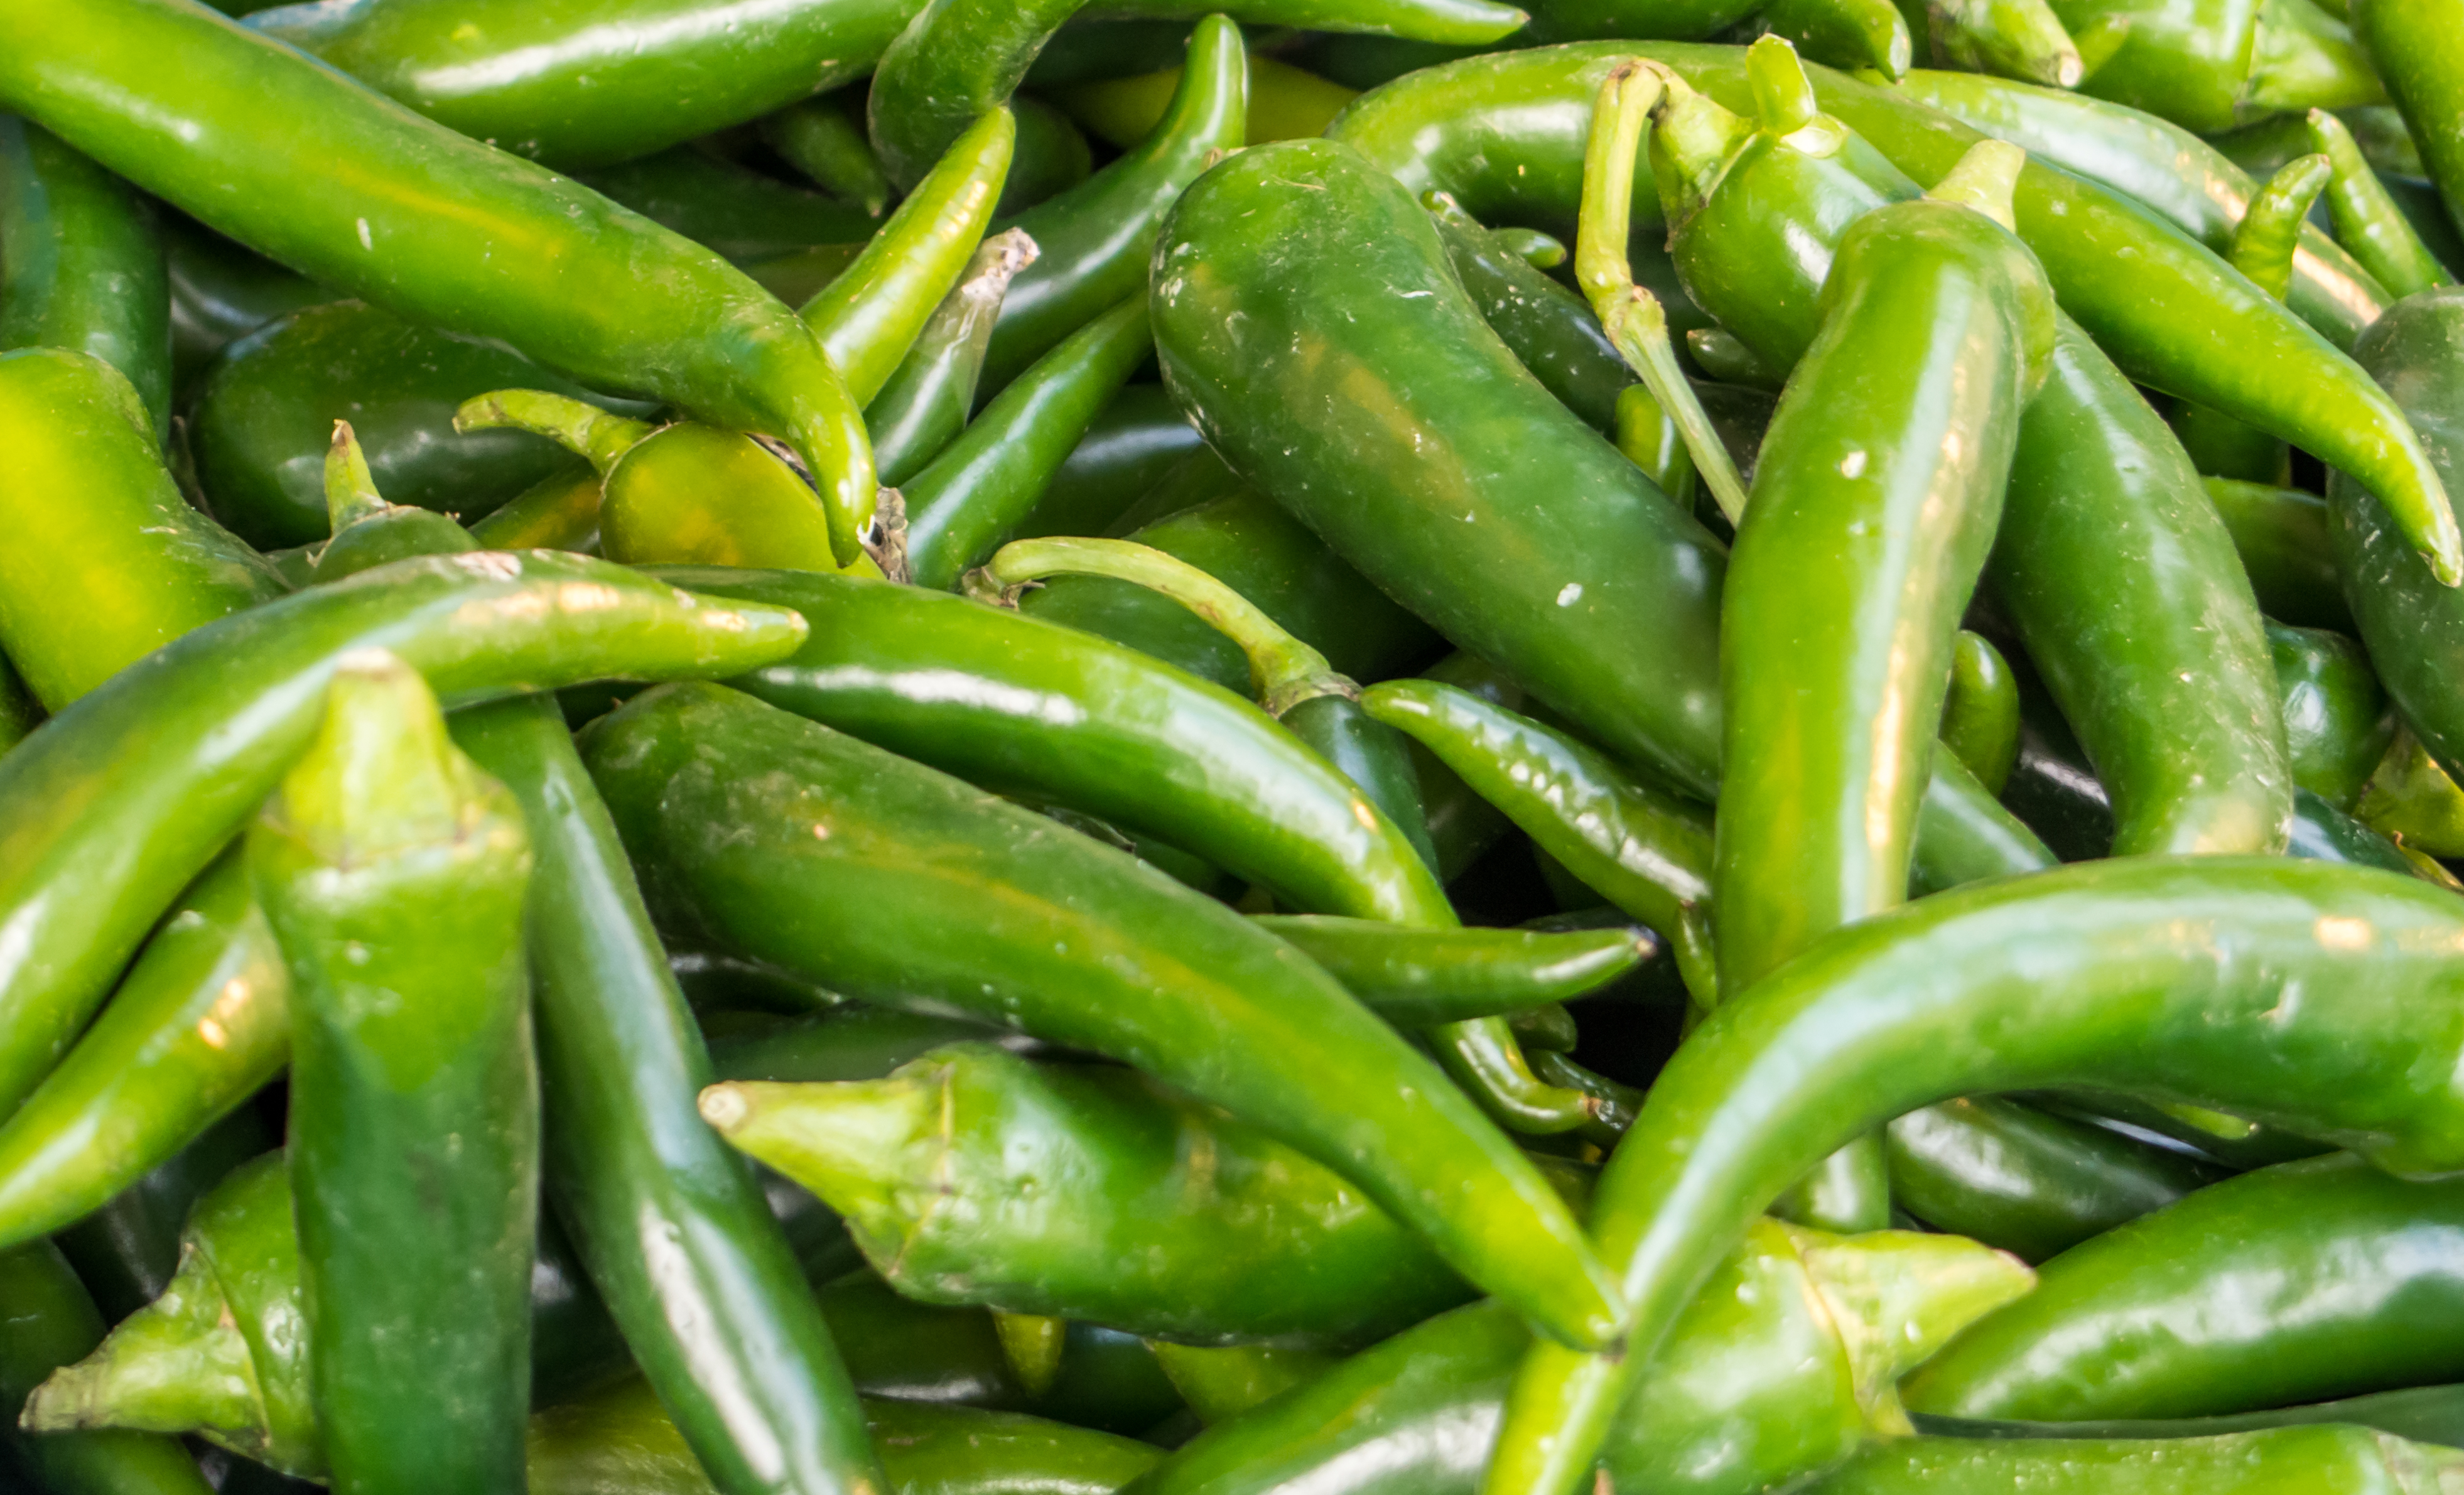 Spicy green hot chili peppers photo